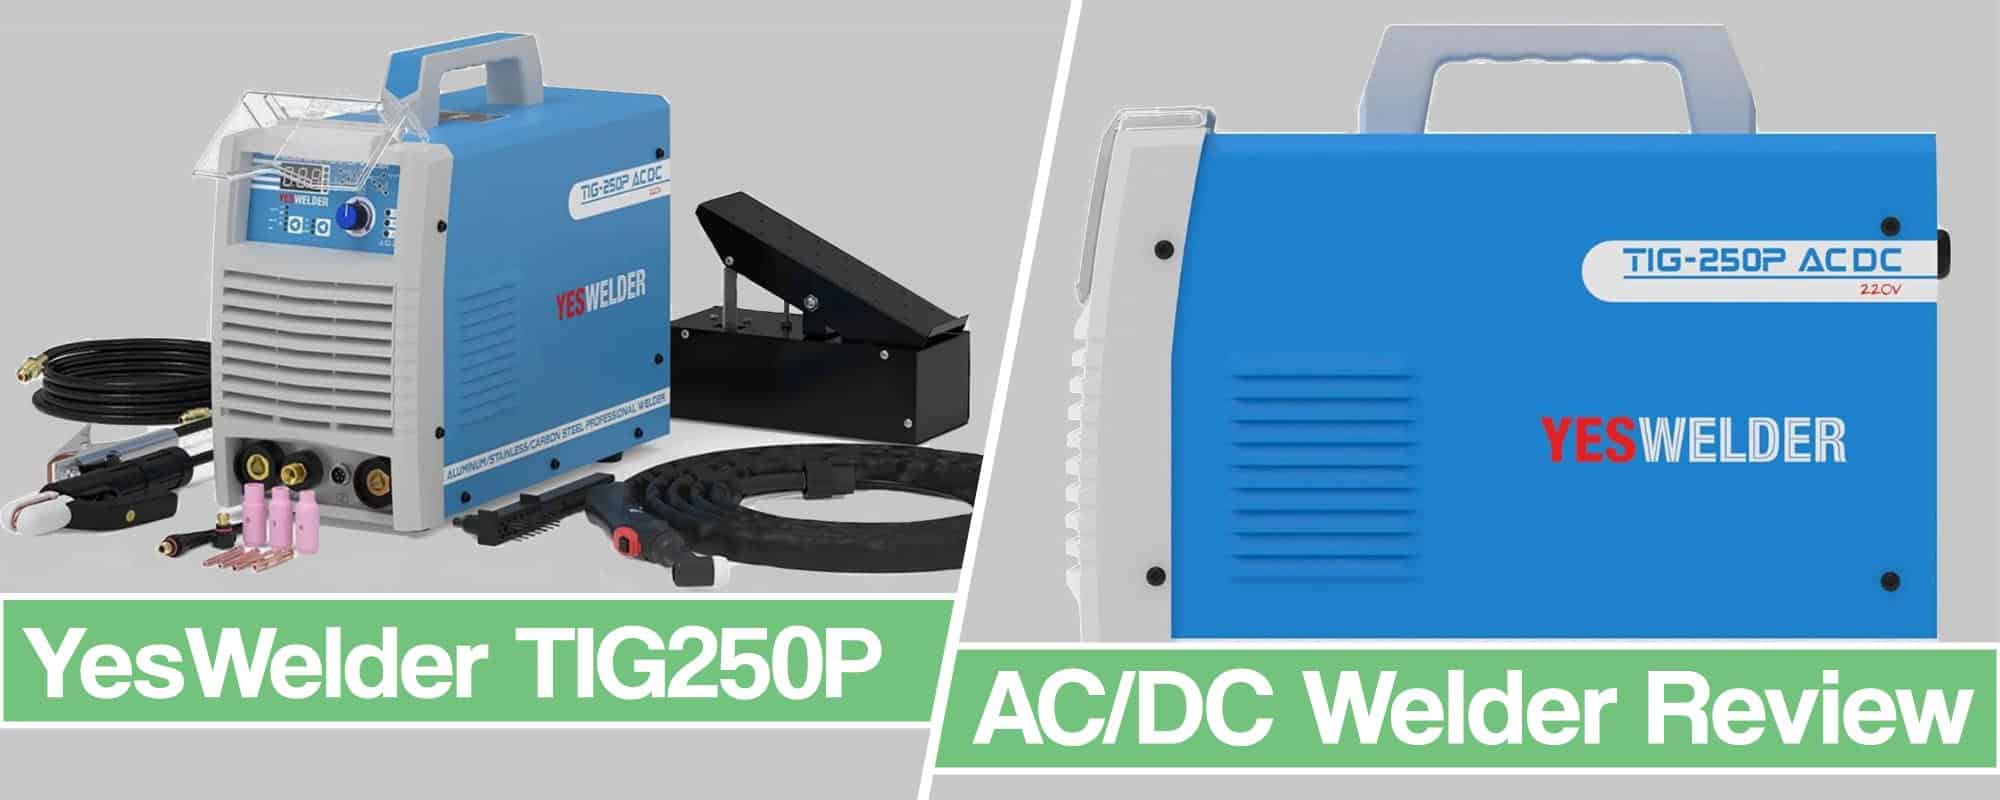 Yeswelder TIG 250P ACDC – Power, Features, Price and Build Quality of  this AC/DC TIG Welder